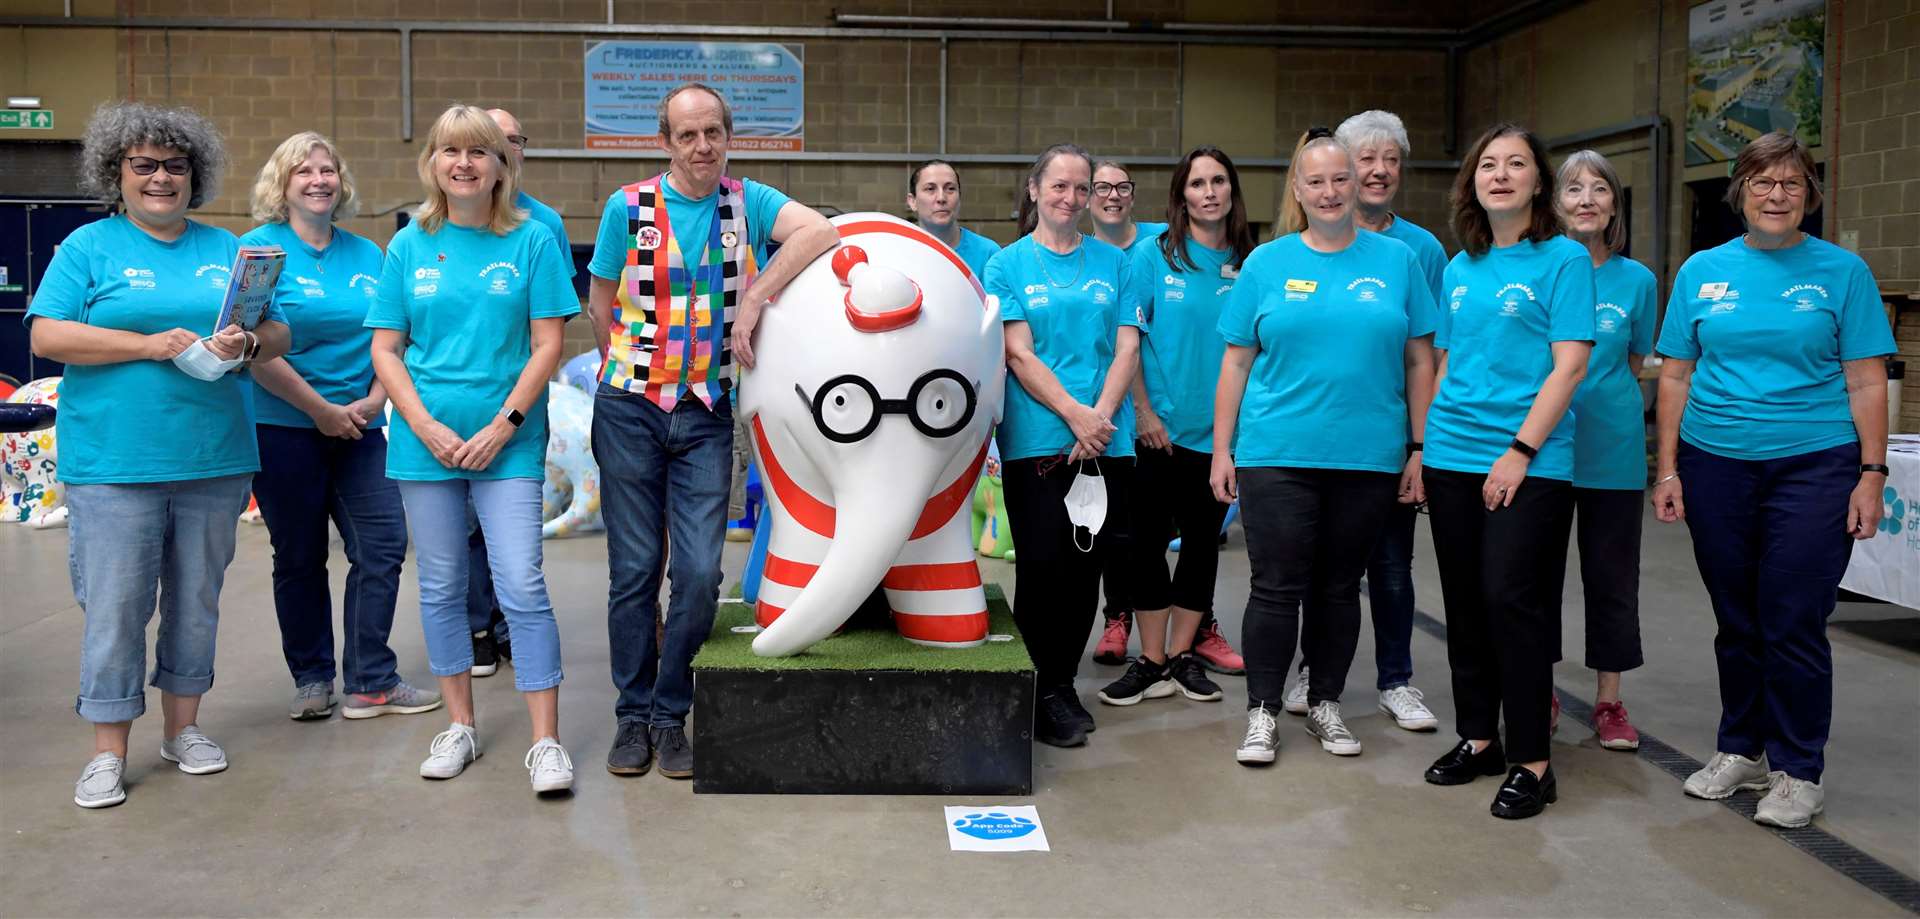 The Elmer trail in 2021 was a huge for the Heart of Kent Hospice team